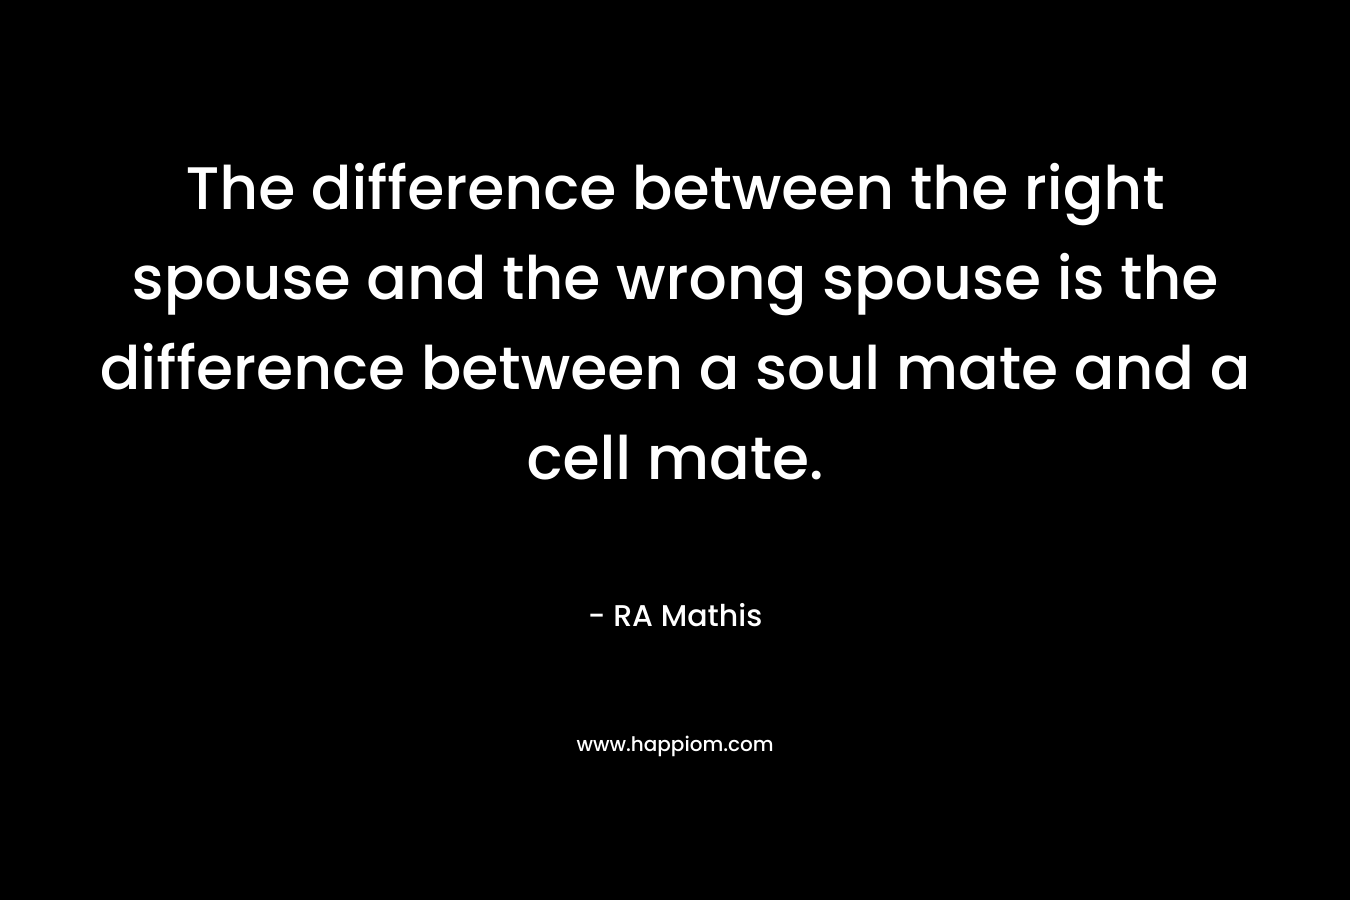 The difference between the right spouse and the wrong spouse is the difference between a soul mate and a cell mate. – RA Mathis